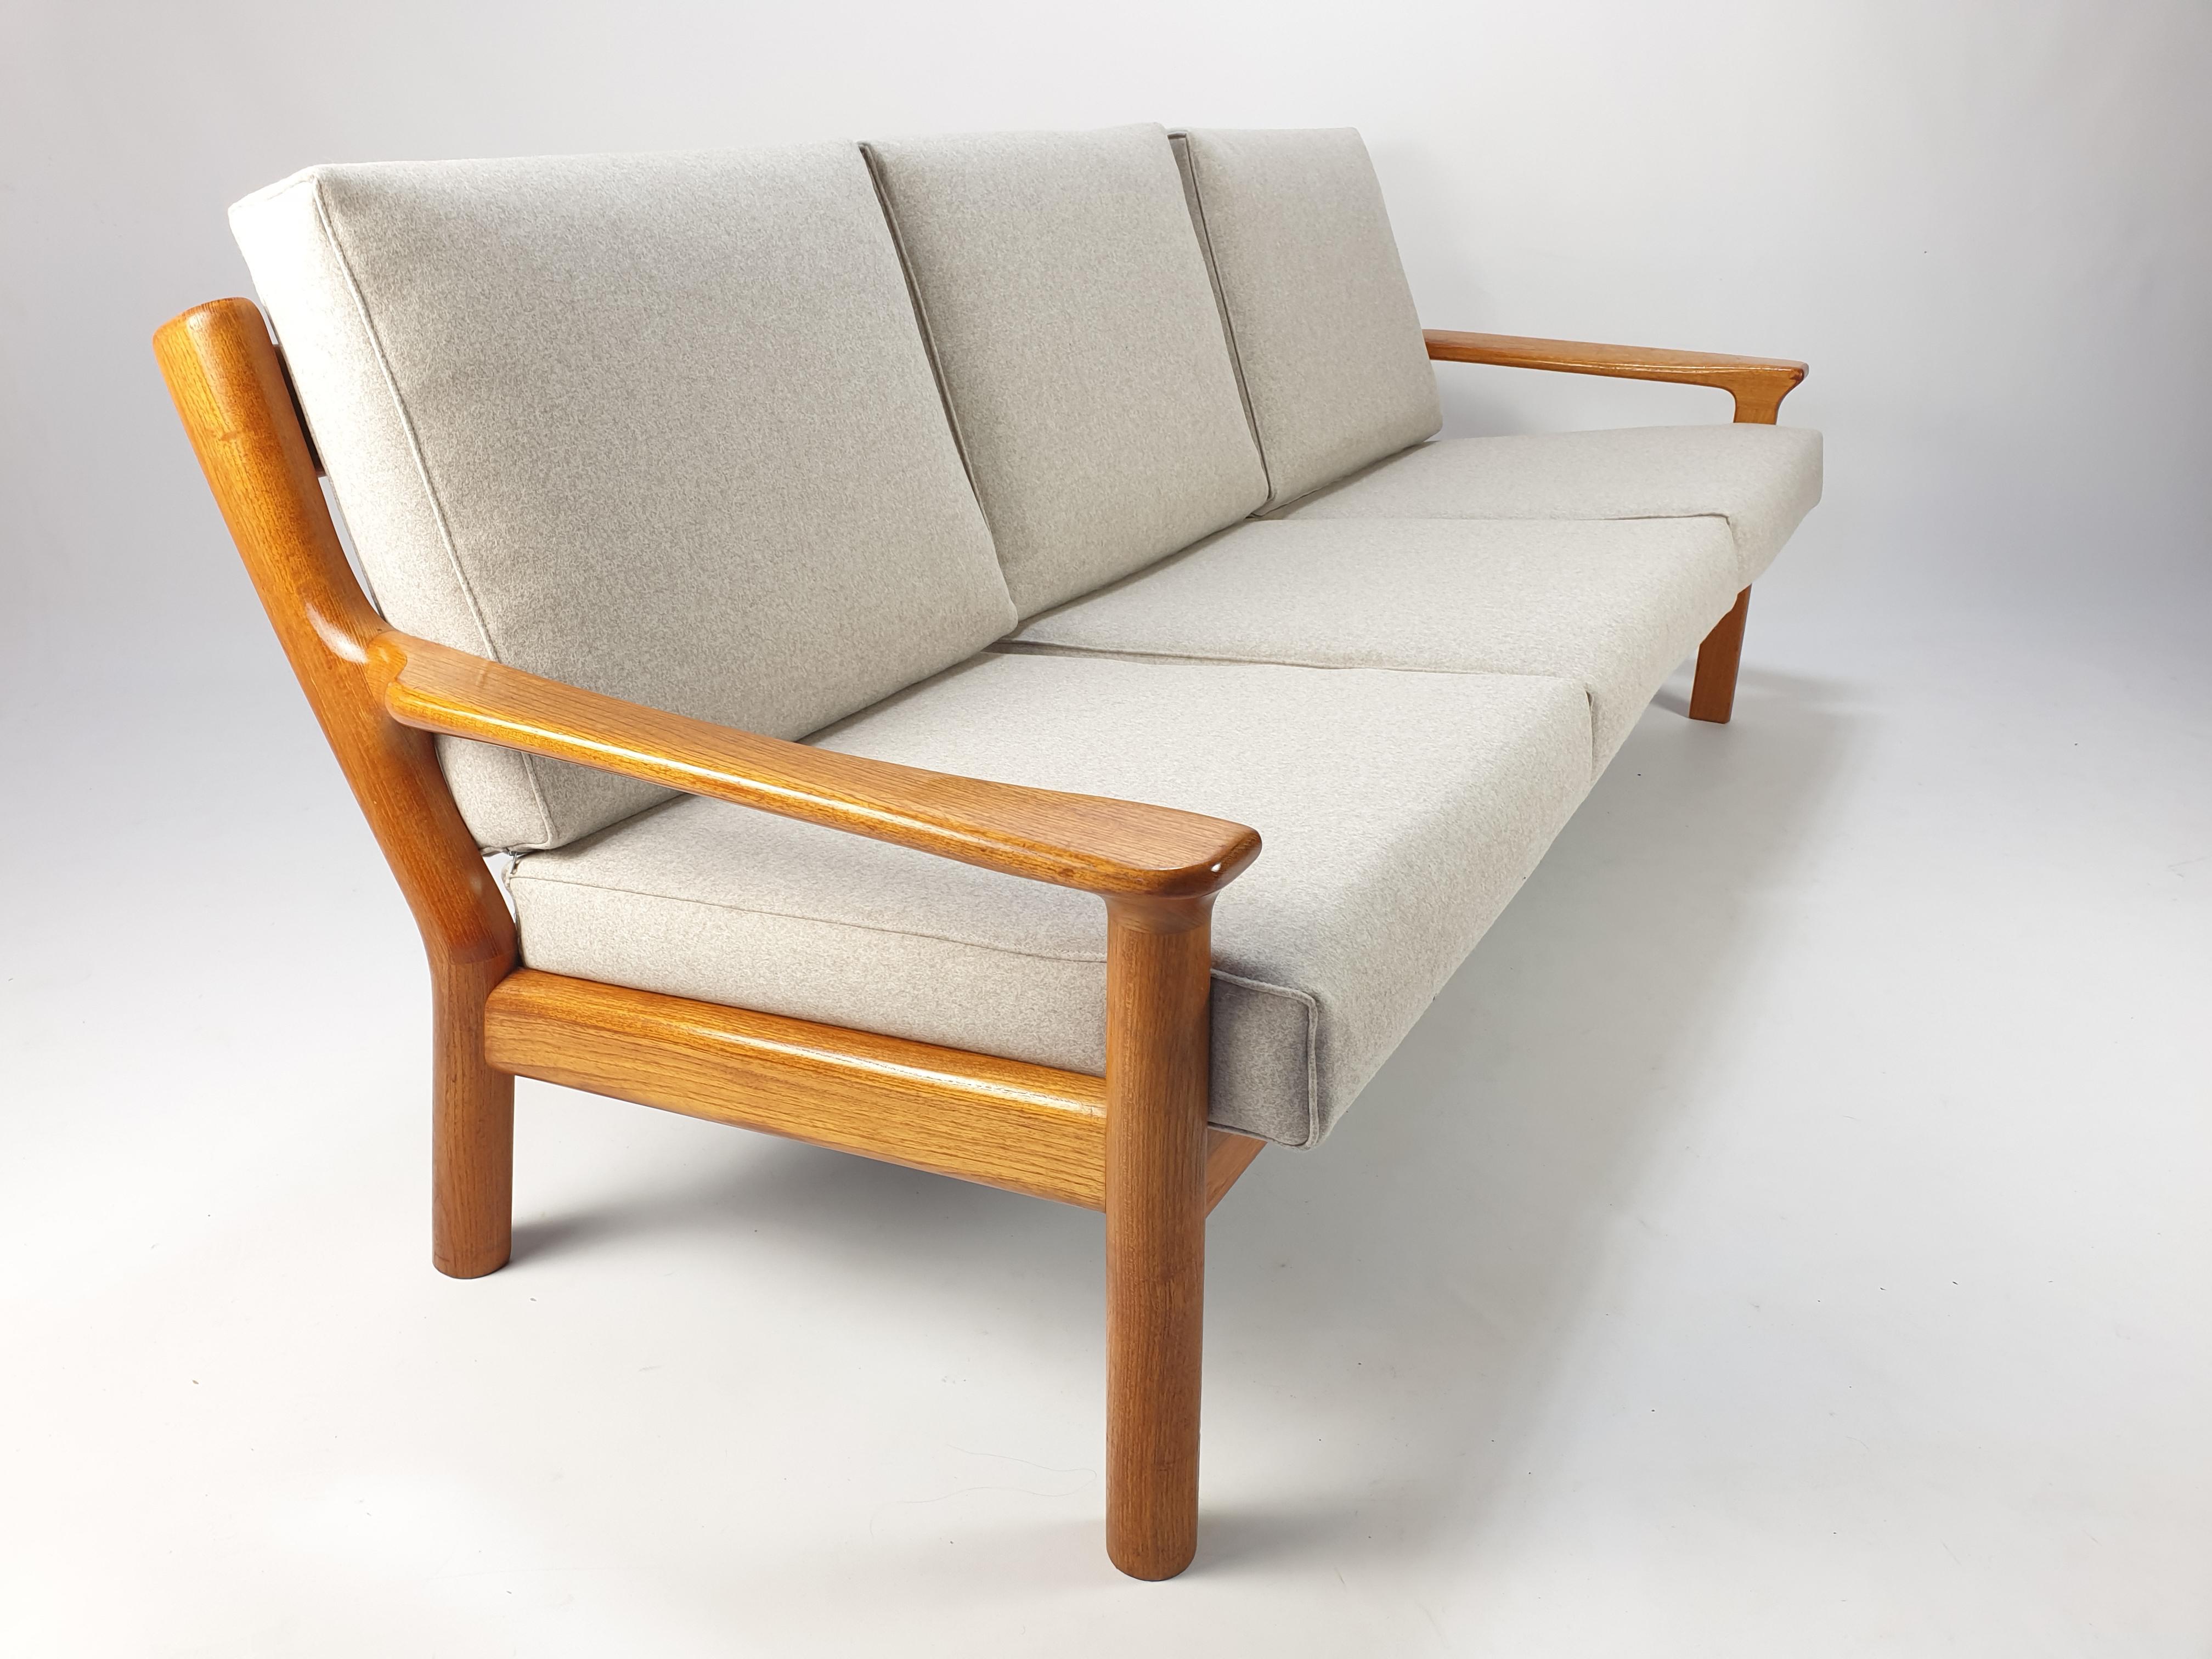 Late 20th Century Mid Century Teak 3-Seater Sofa by Juul Kristensen for Glostrup, 1970s For Sale